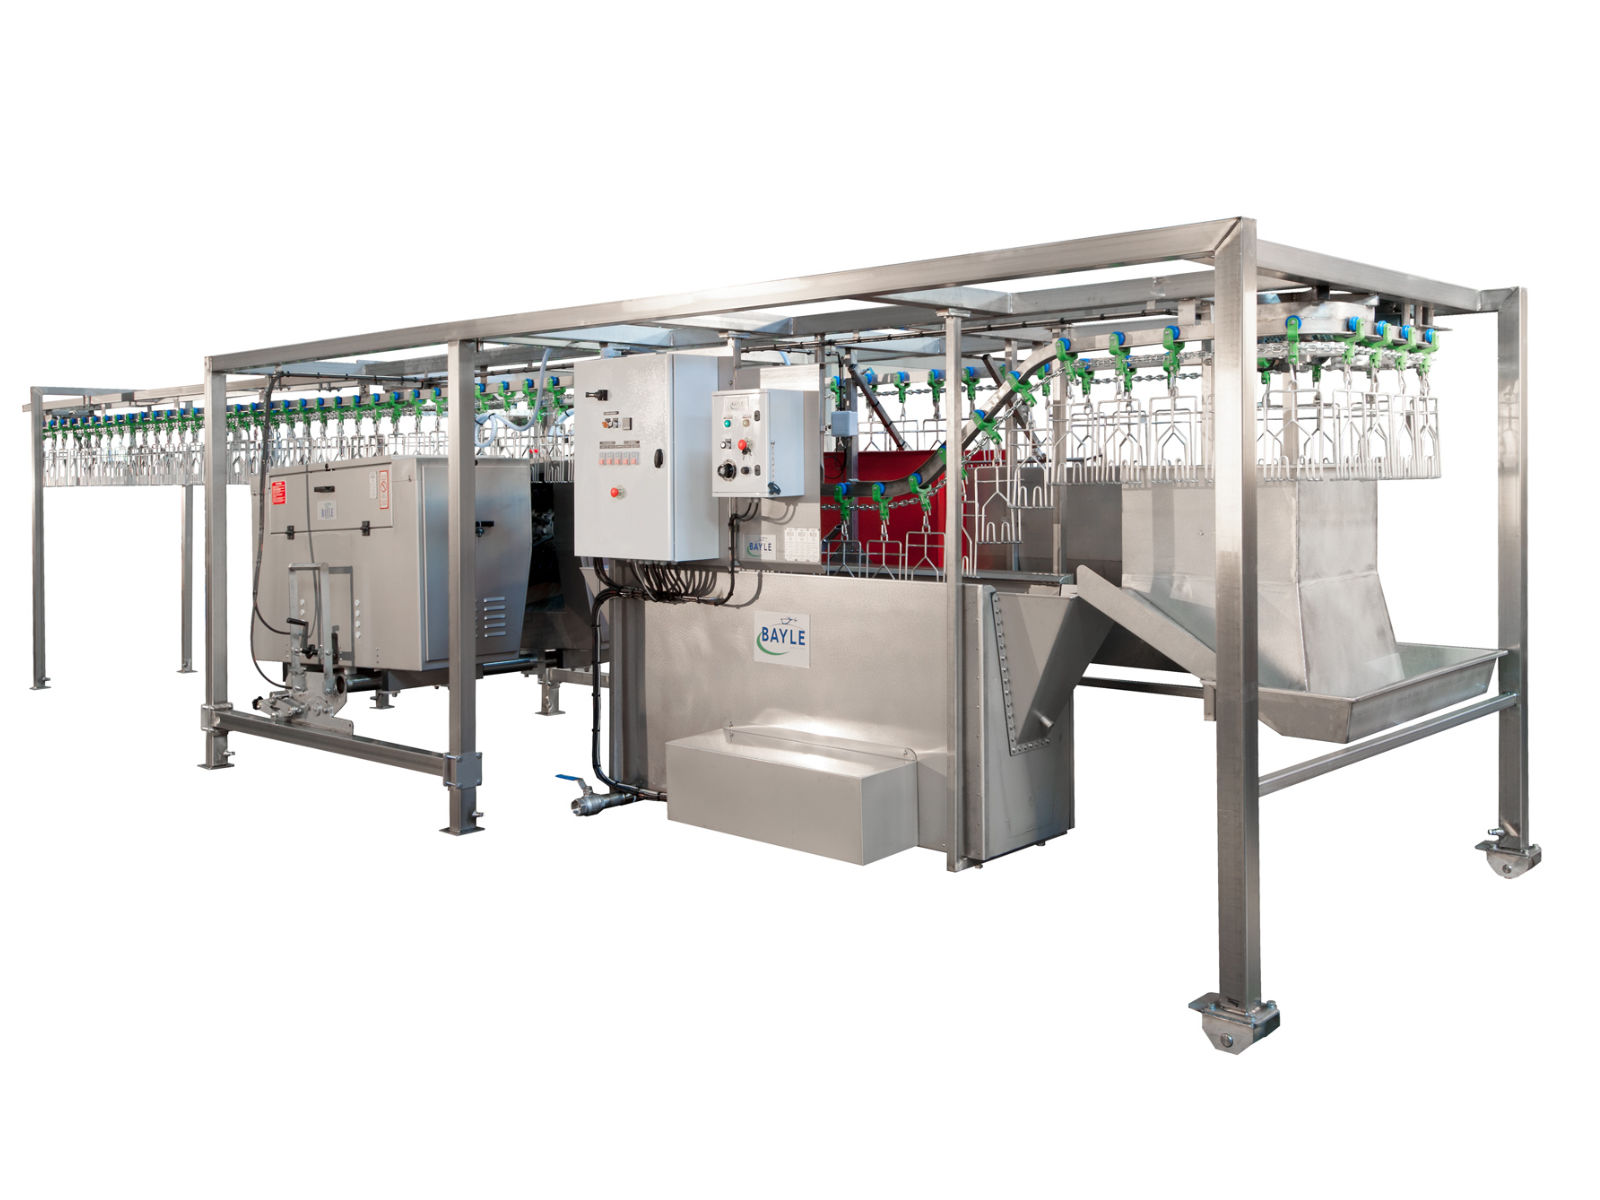 COMPACT 500 the ready-to-use equipment for the poultry processing